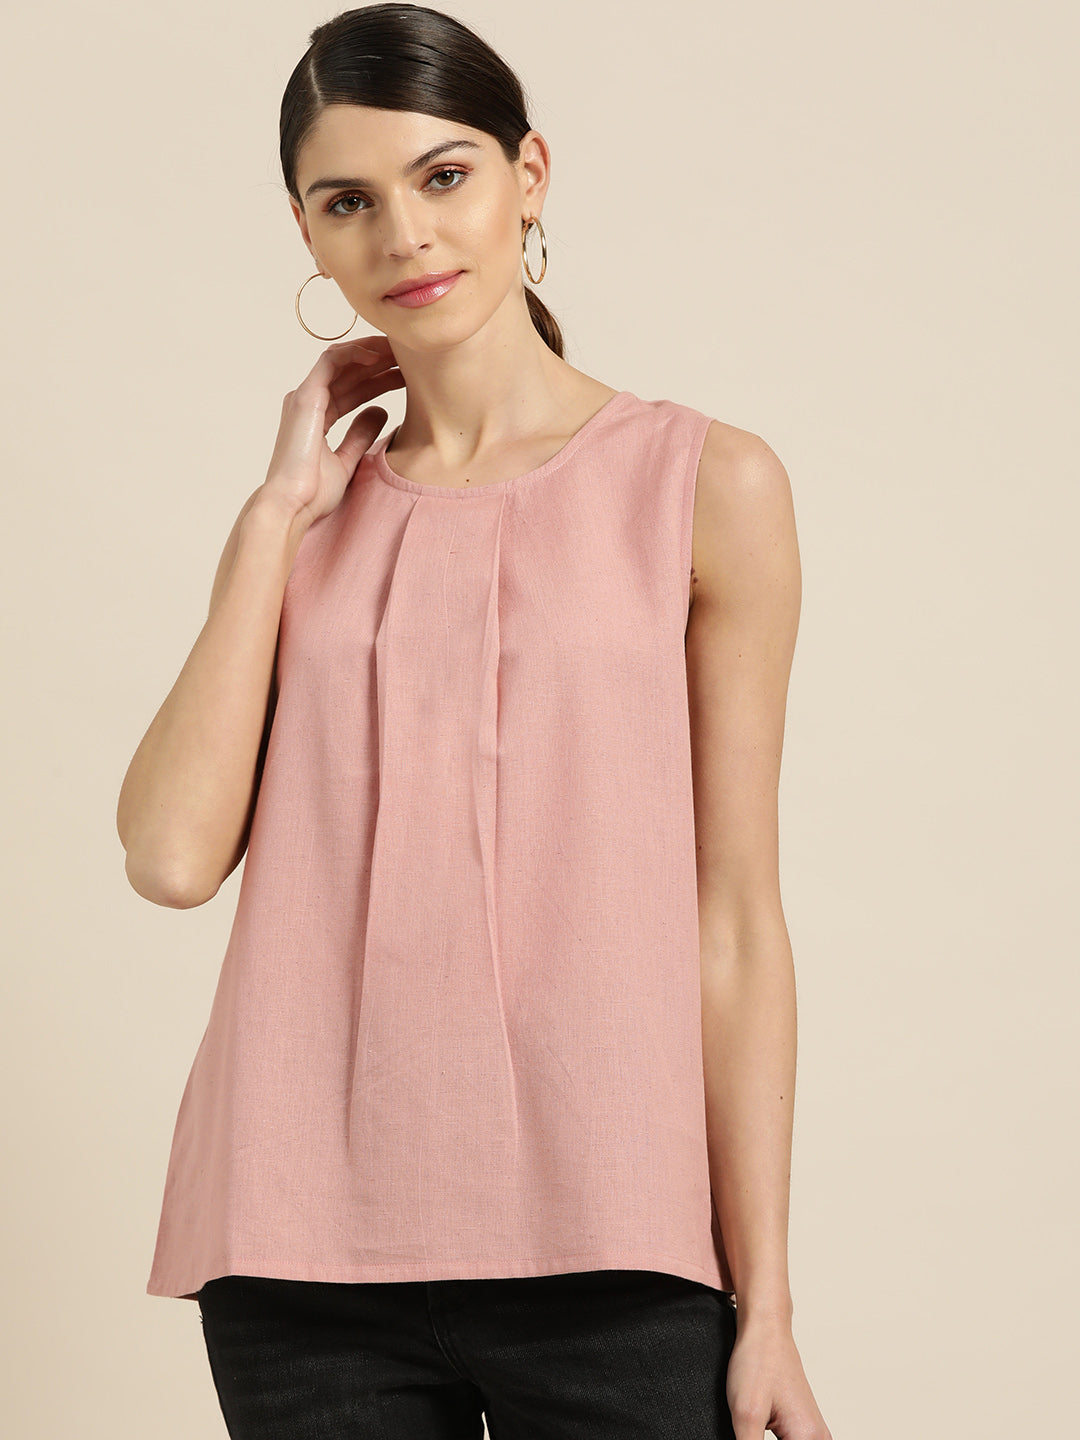 N2Z2TOZ - Baked Pink Sleeveless Back Tie Up Top